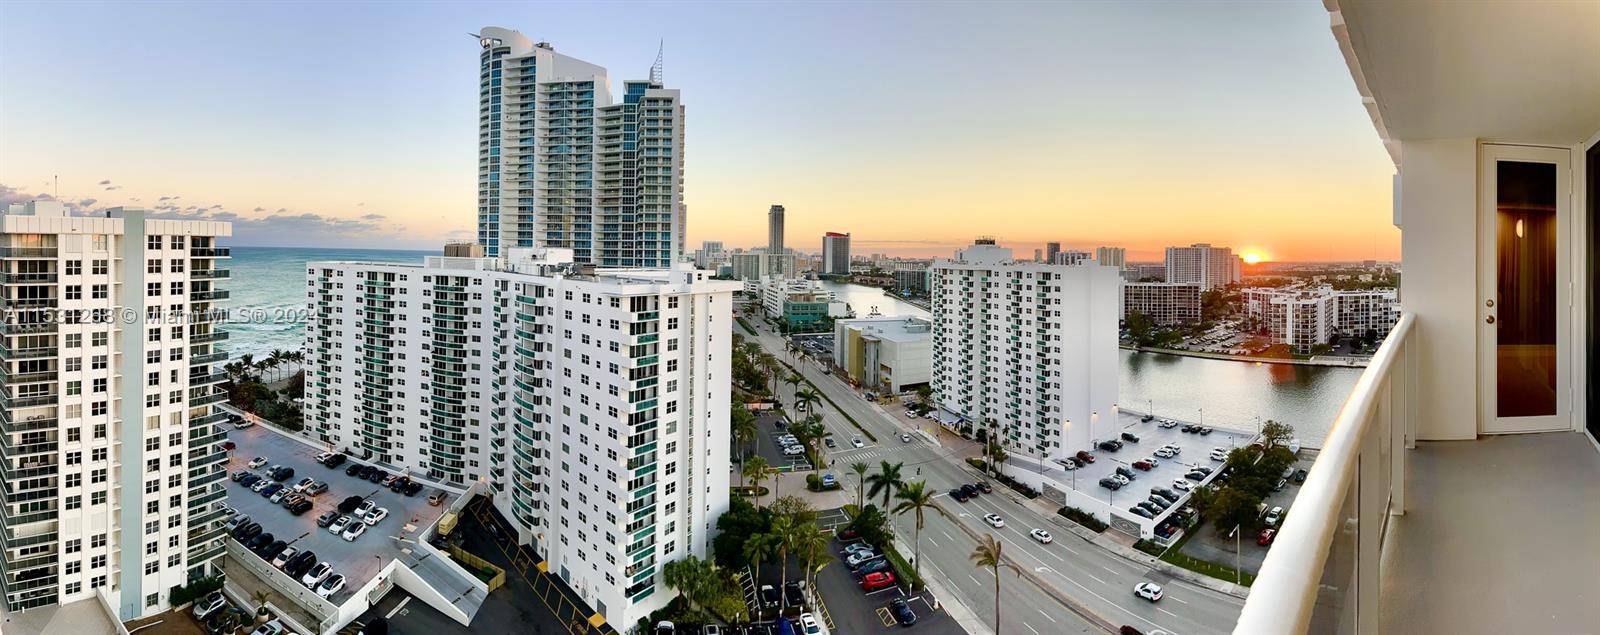 Stunning remodeled Penthouse 2 2 split floor plan Penthouse condo with alluring south facing city, ocean, bay views.